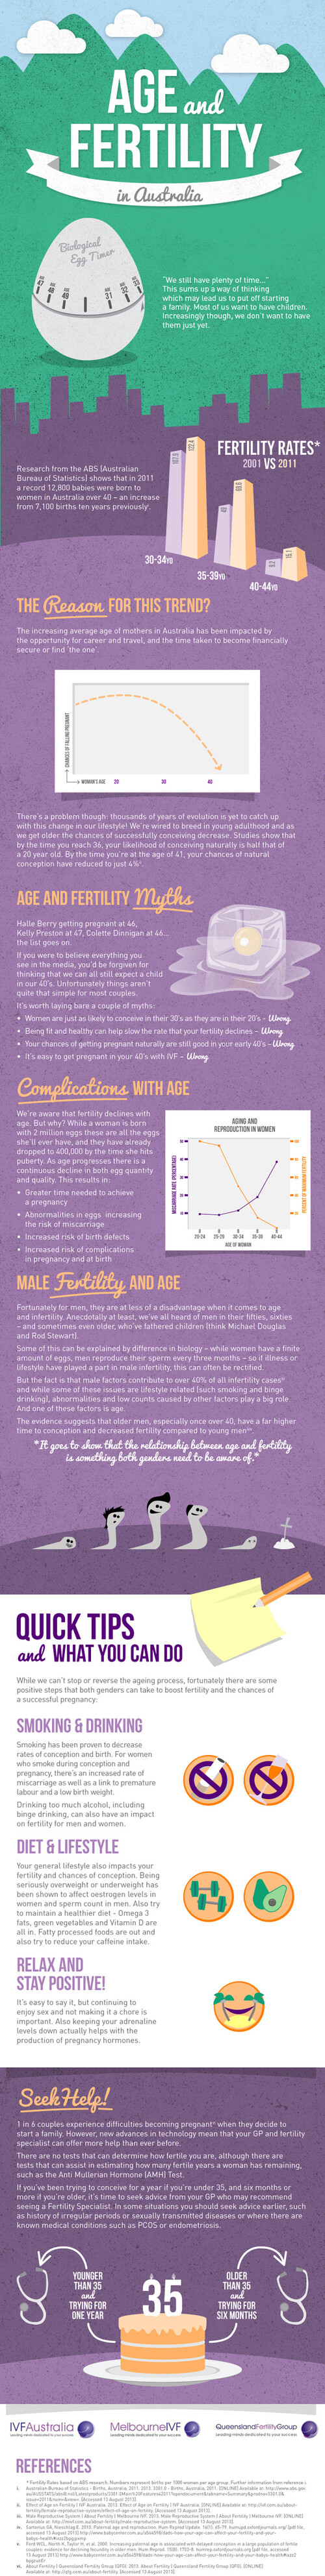 Age and fertility infographic